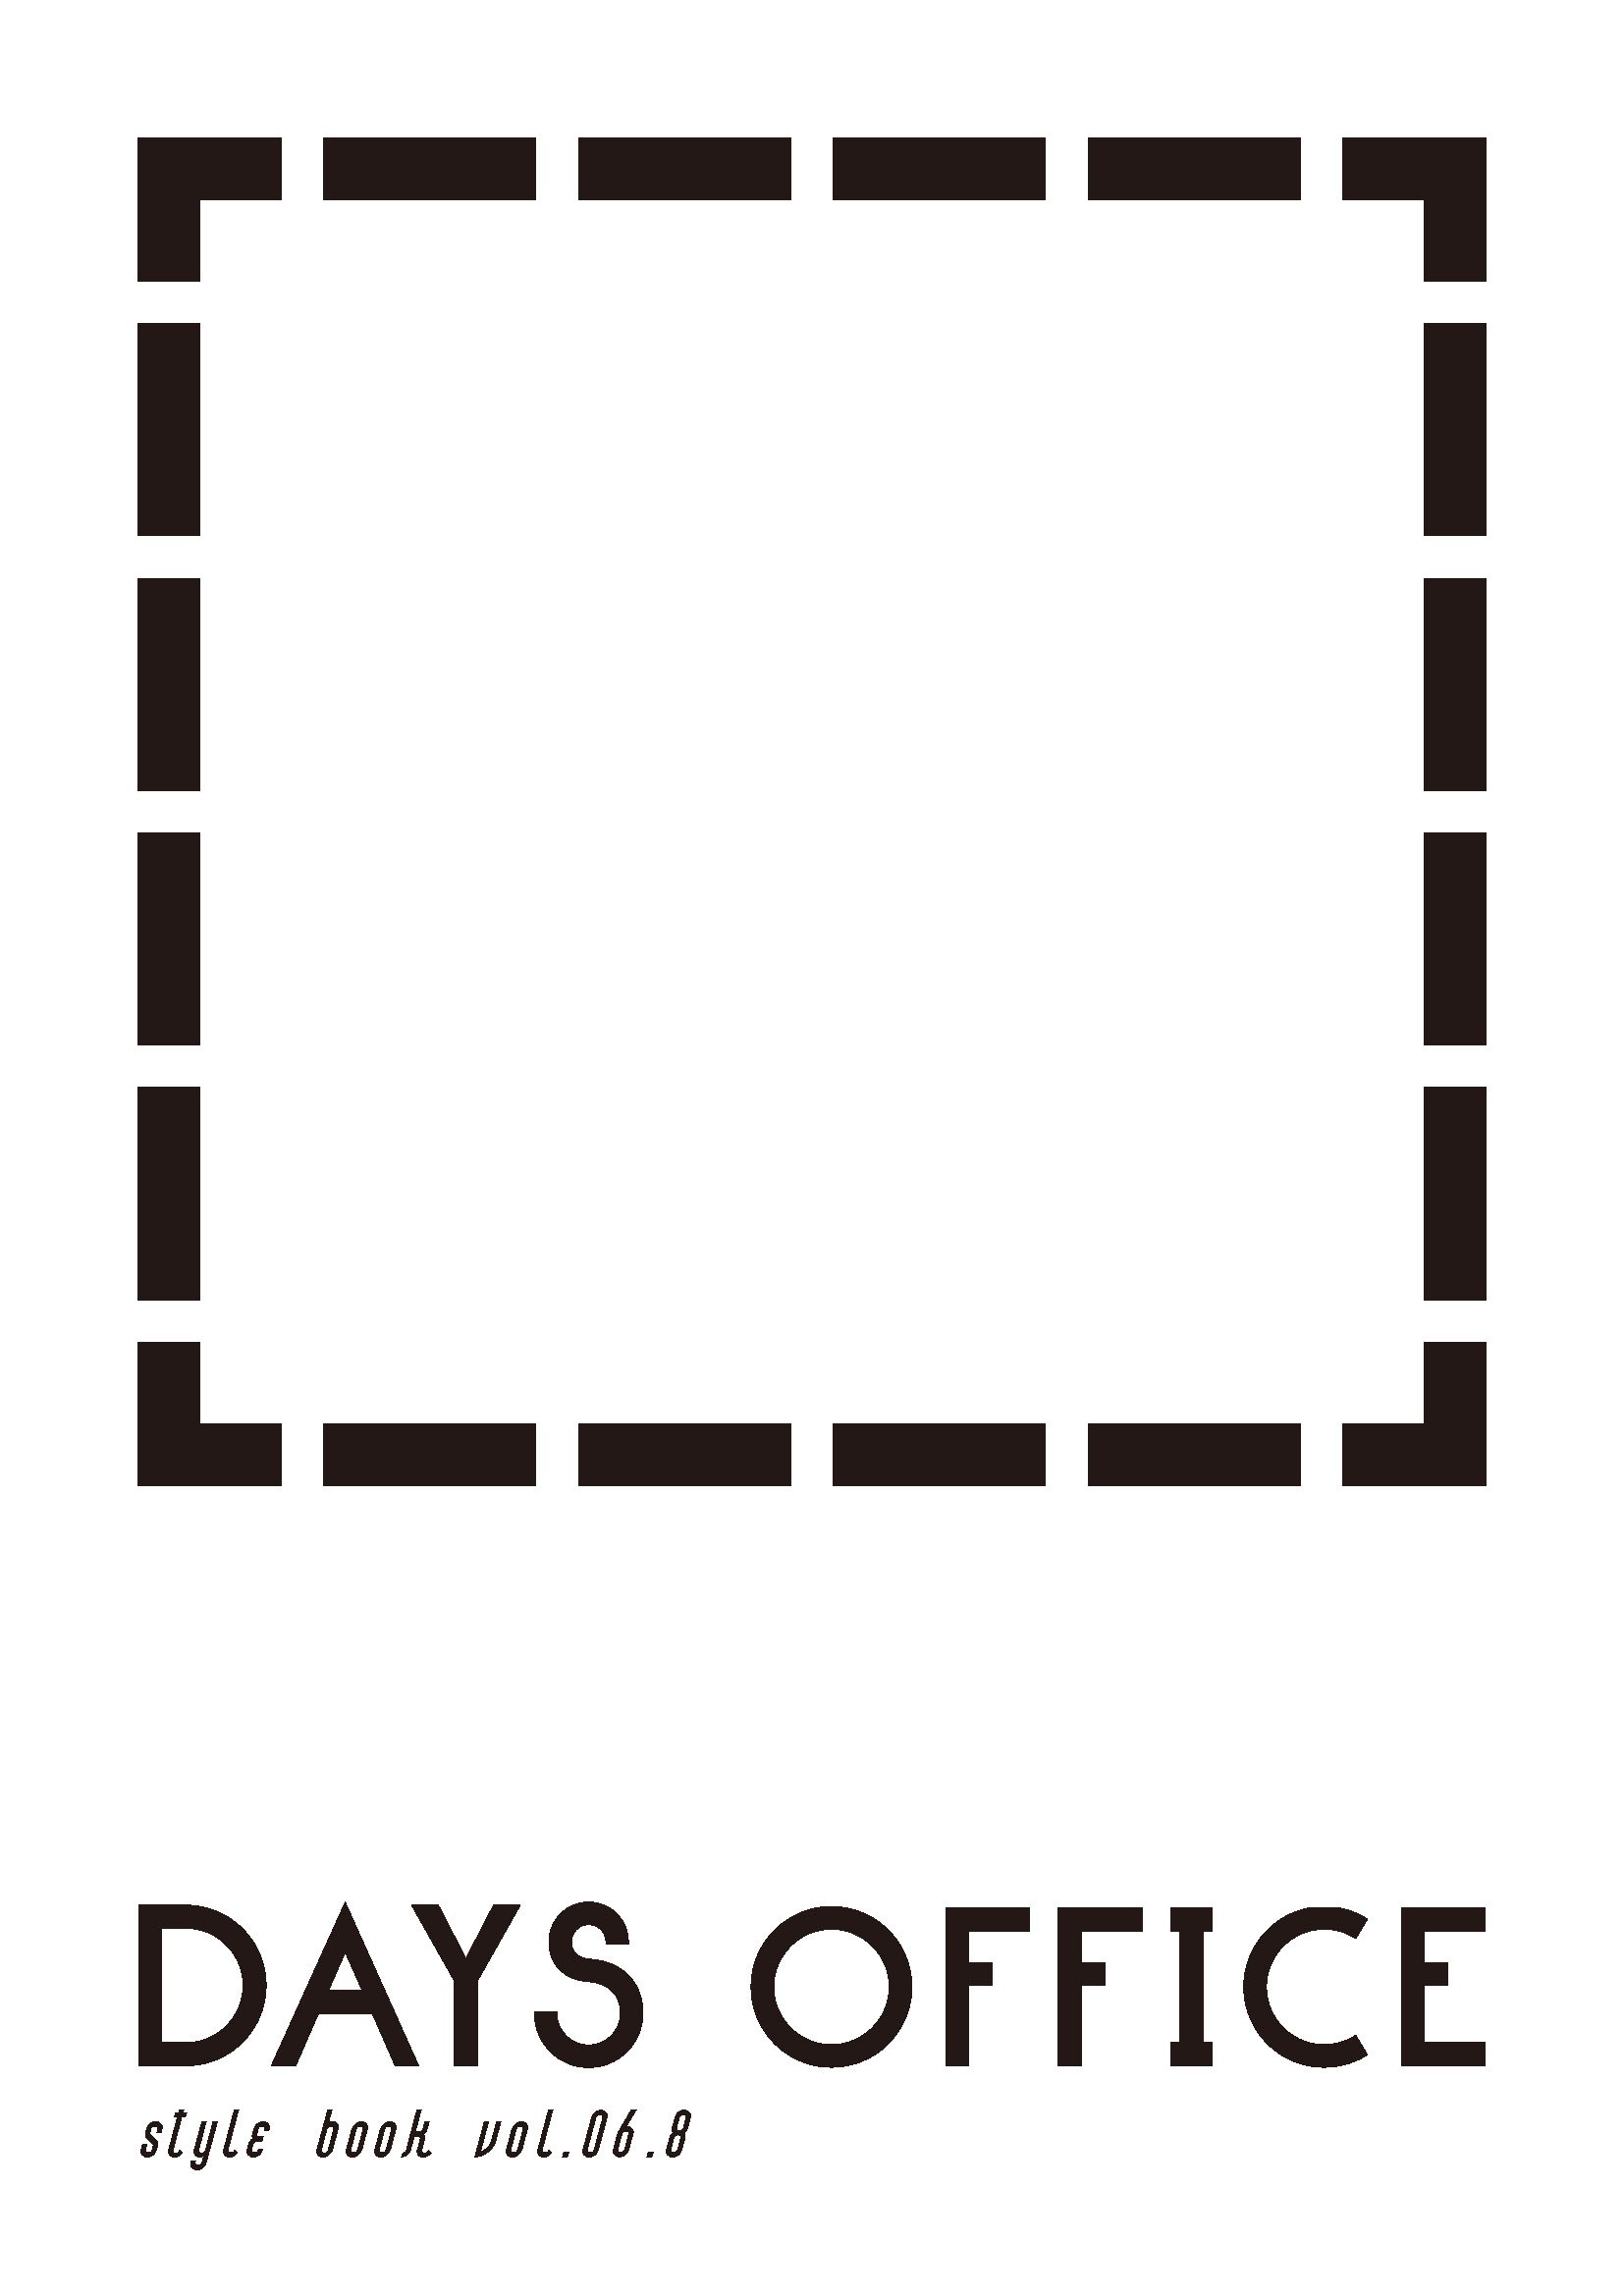 DAYS OFFICE STYLE BOOK Vol.6.7